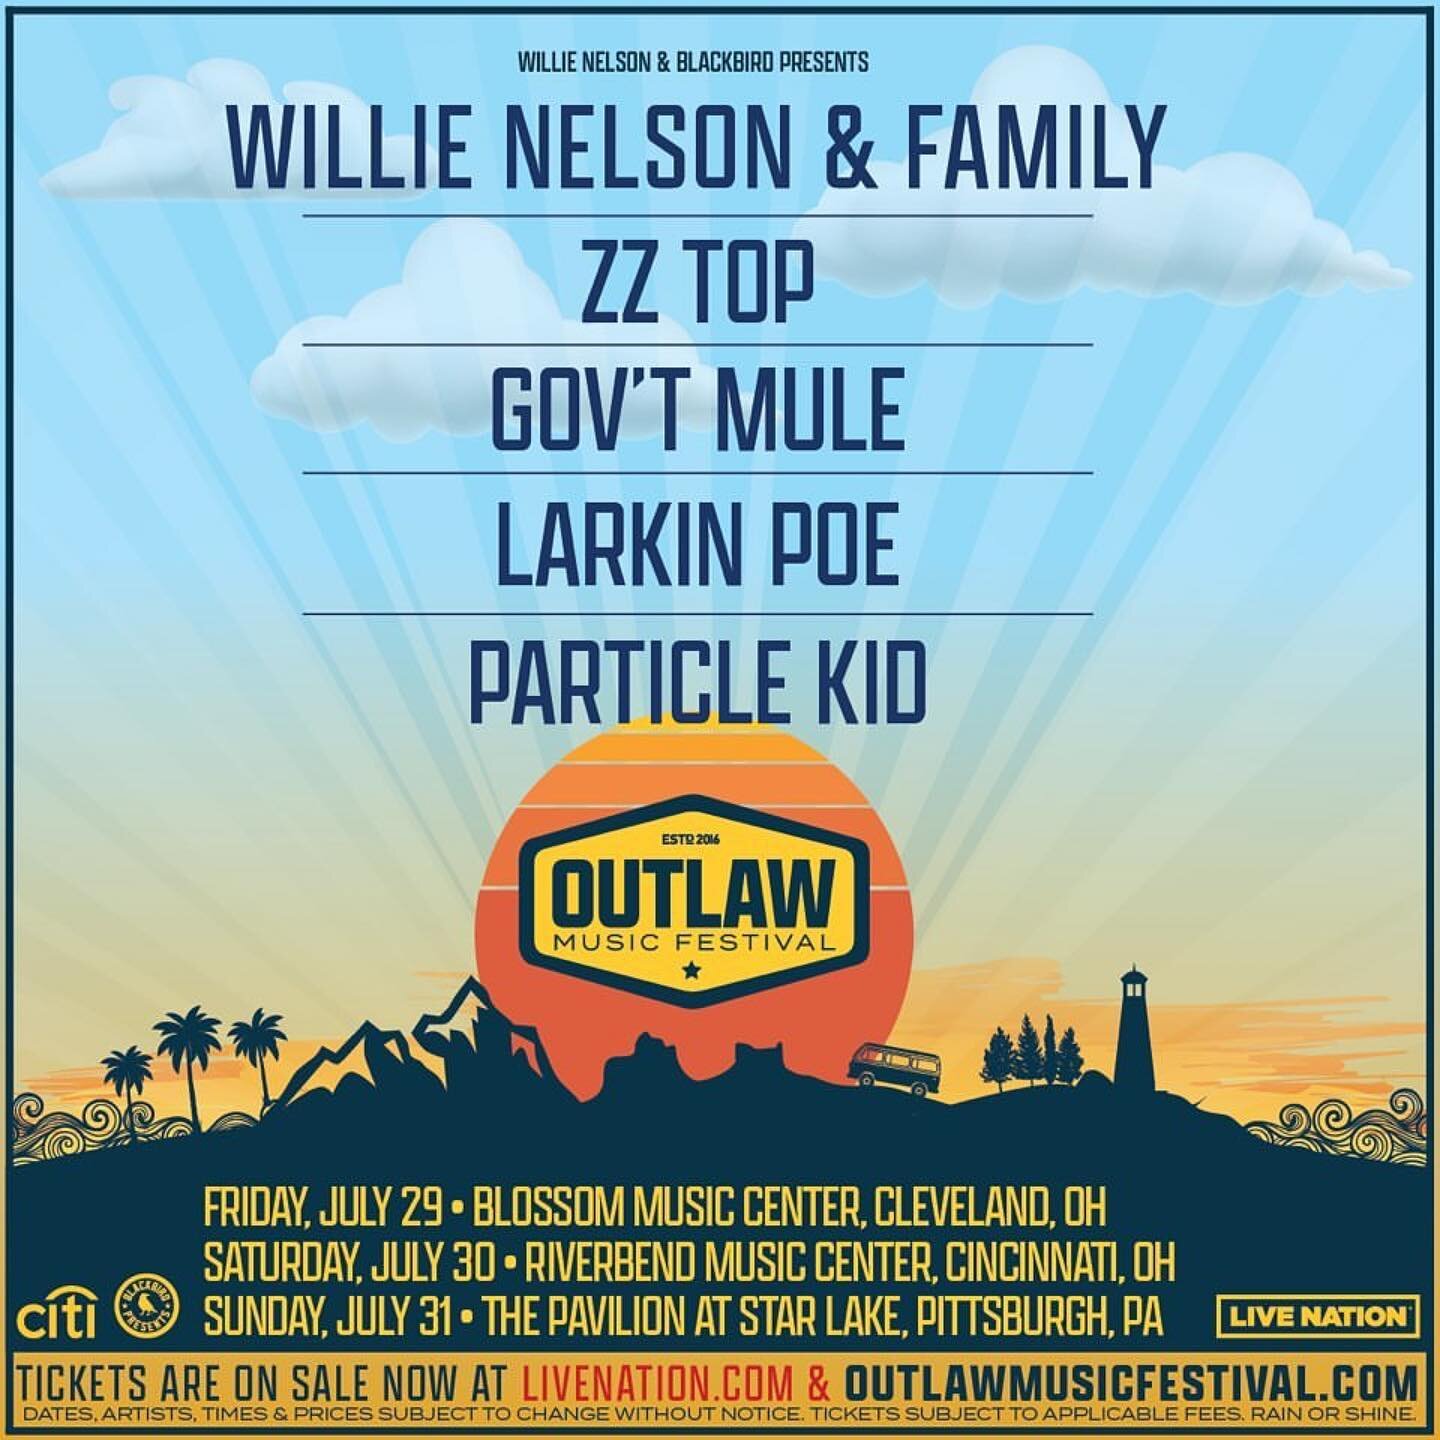 OOOOOOO-HIGH-OOOOOOOOOO 
Willie Nelson and Family is on their way way to Cleveland, Cincinnati, and Pittsburgh this weekend with the 2022 Outlaw Music Festival Tour! They&rsquo;re excited to join @willienelsonofficial @zztop @govtmule @larkinpoe and 